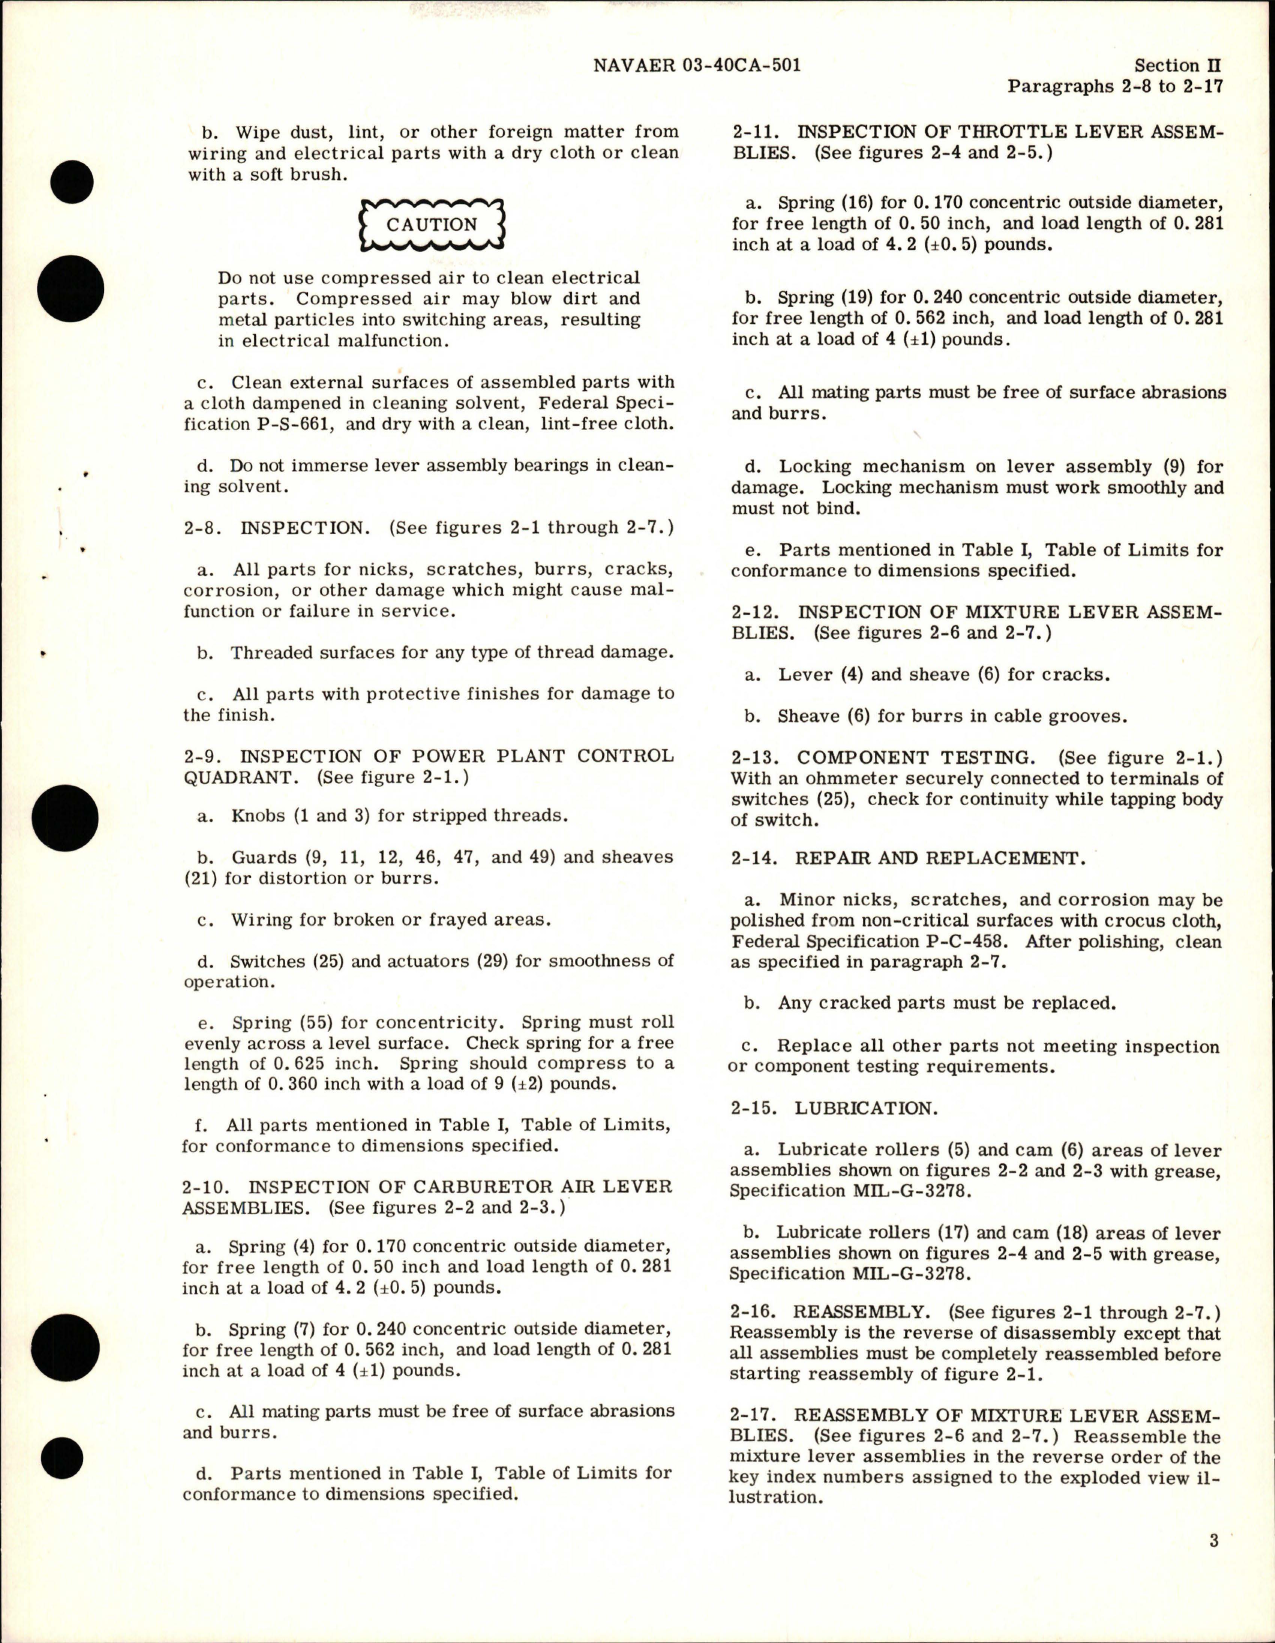 Sample page 7 from AirCorps Library document: Overhaul Instructions for Power Plant Control Quadrant - Parts 5L2931-0, 5L2931-1, 5L2931-2, and 5L2931-3